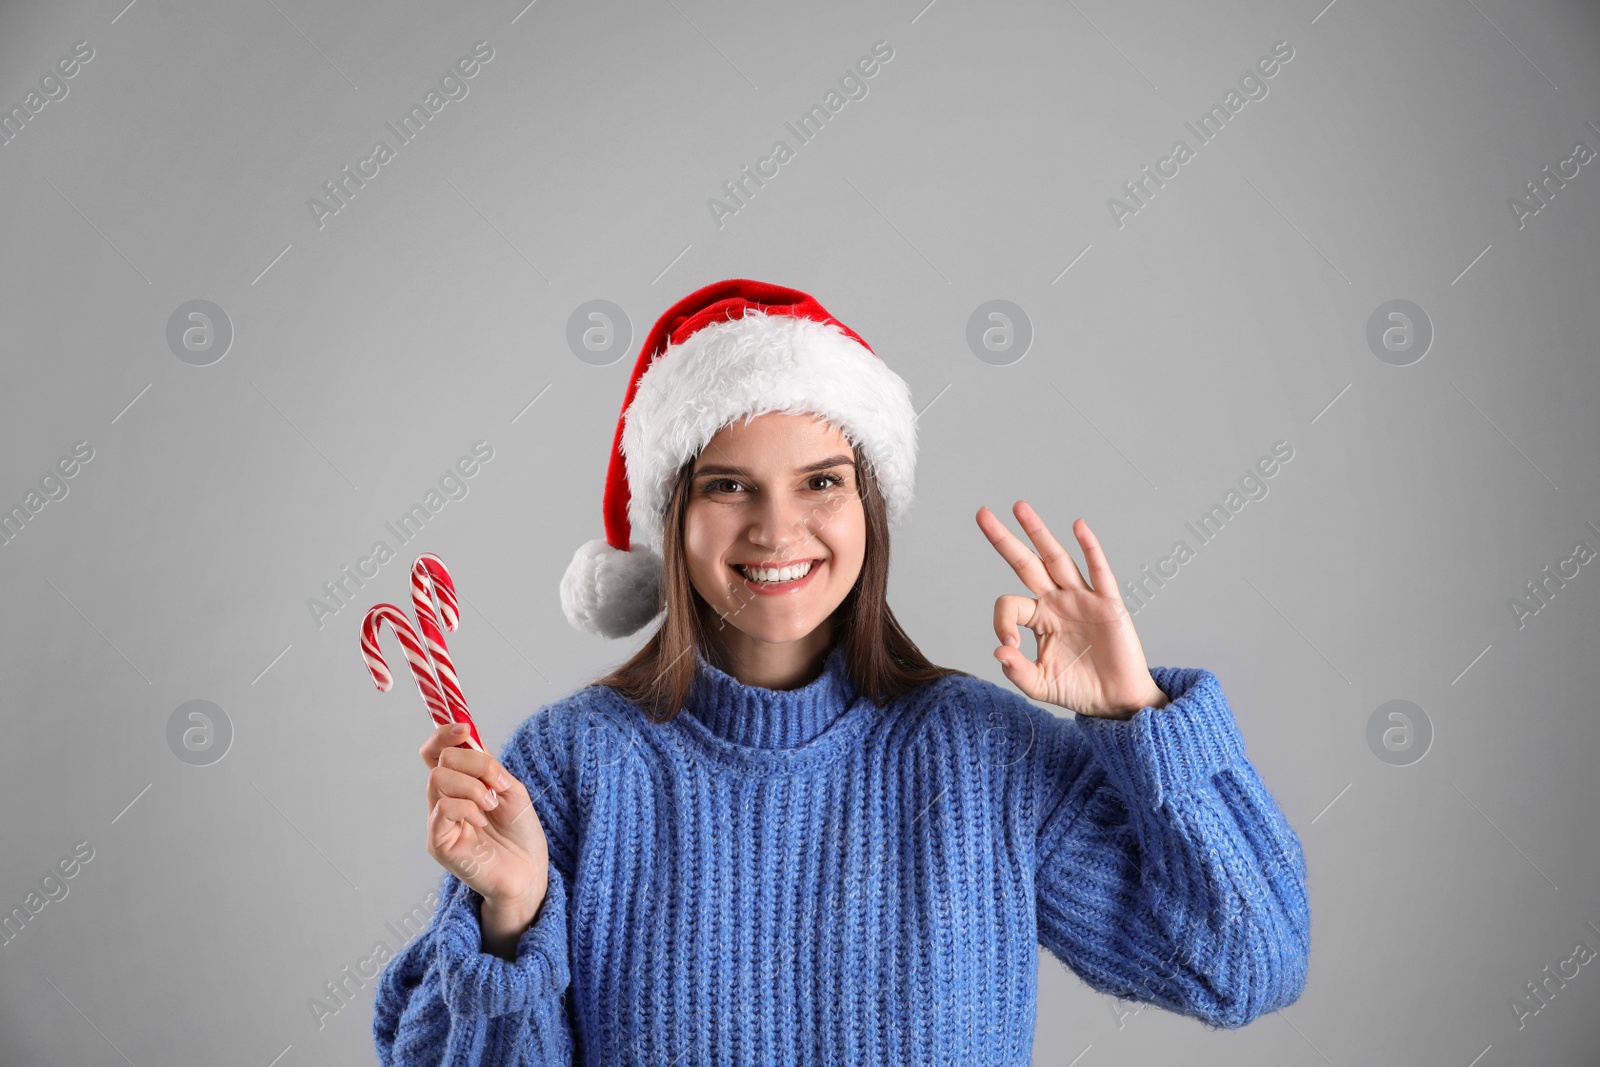 Photo of Pretty woman in Santa hat and blue sweater holding candy canes on grey background